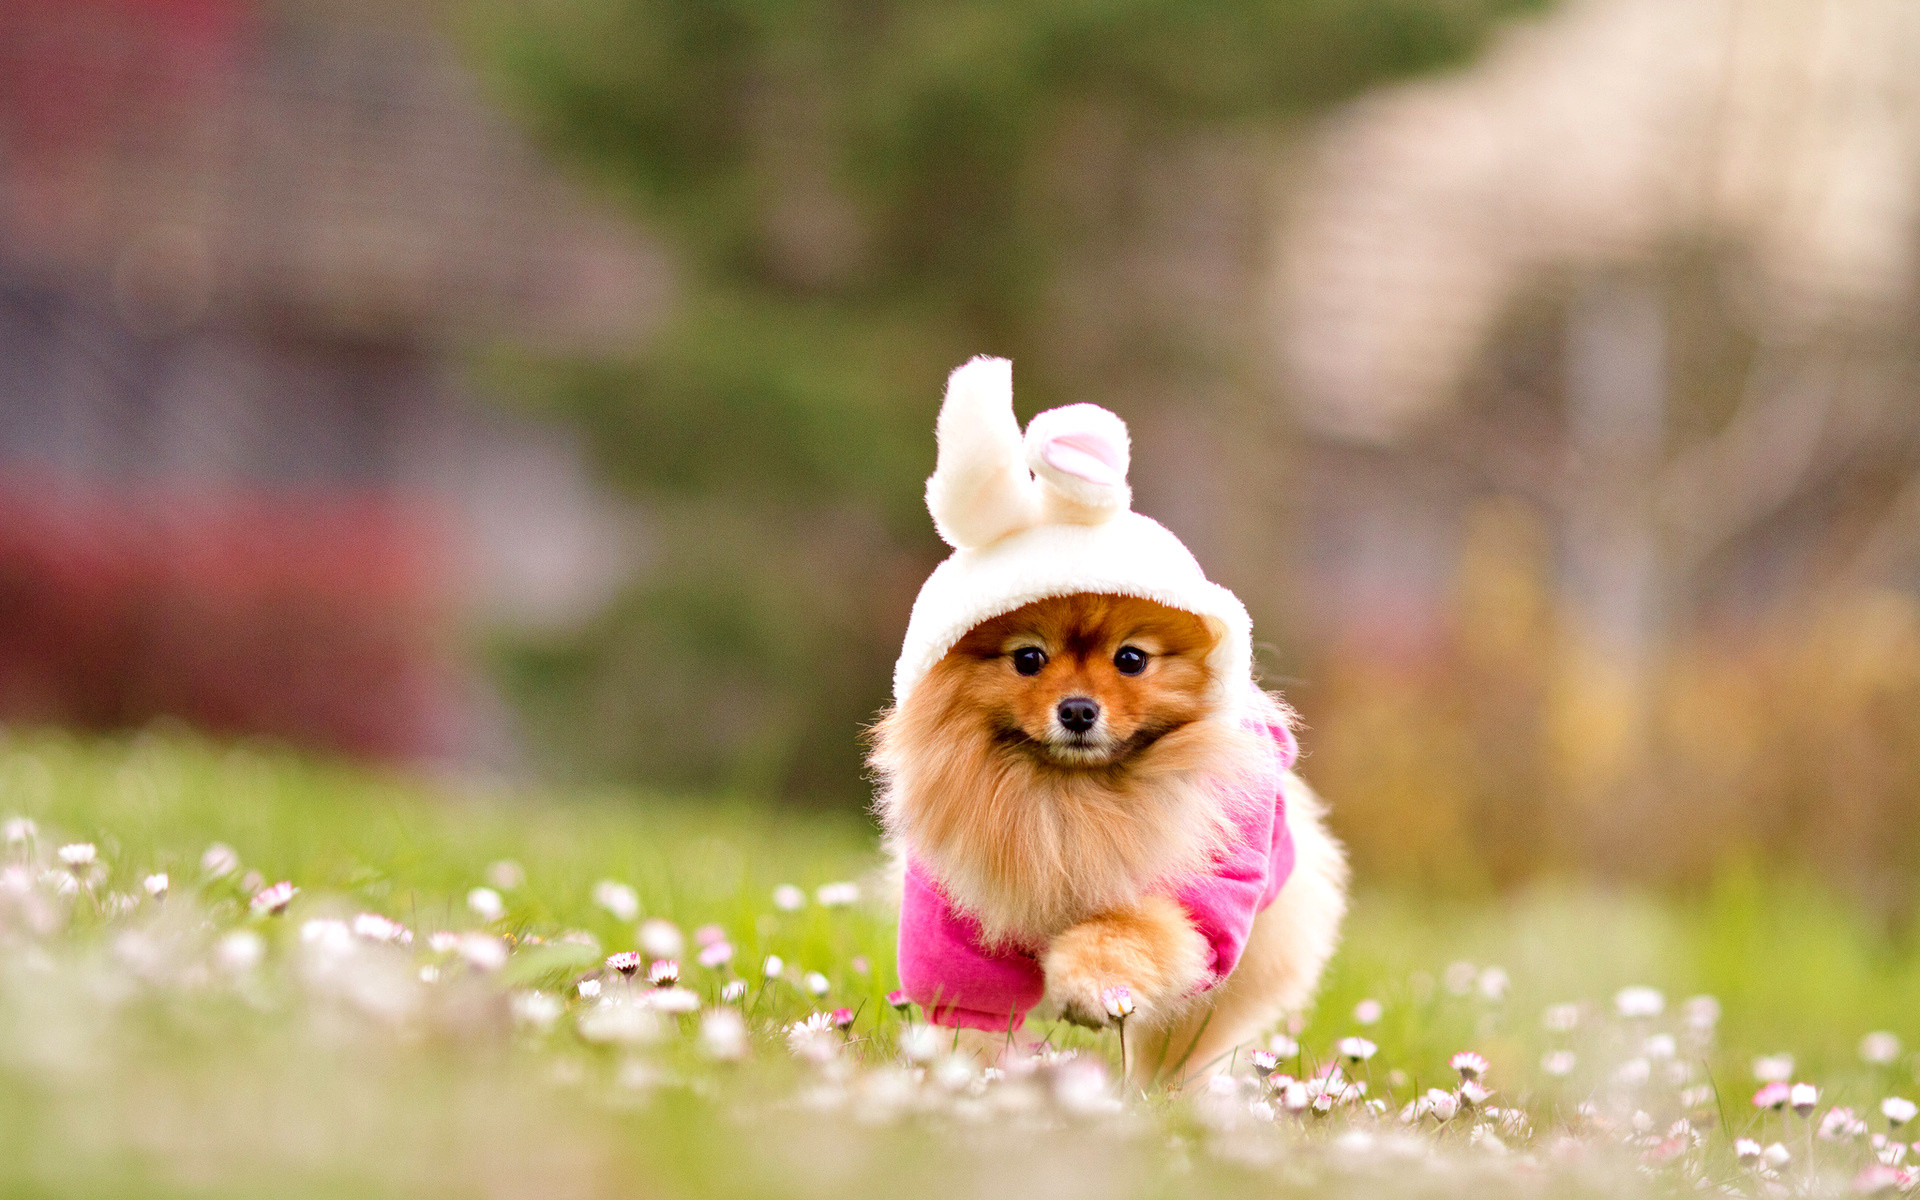 Lovely dog wallpaper download wallpapers cute puppy View HD